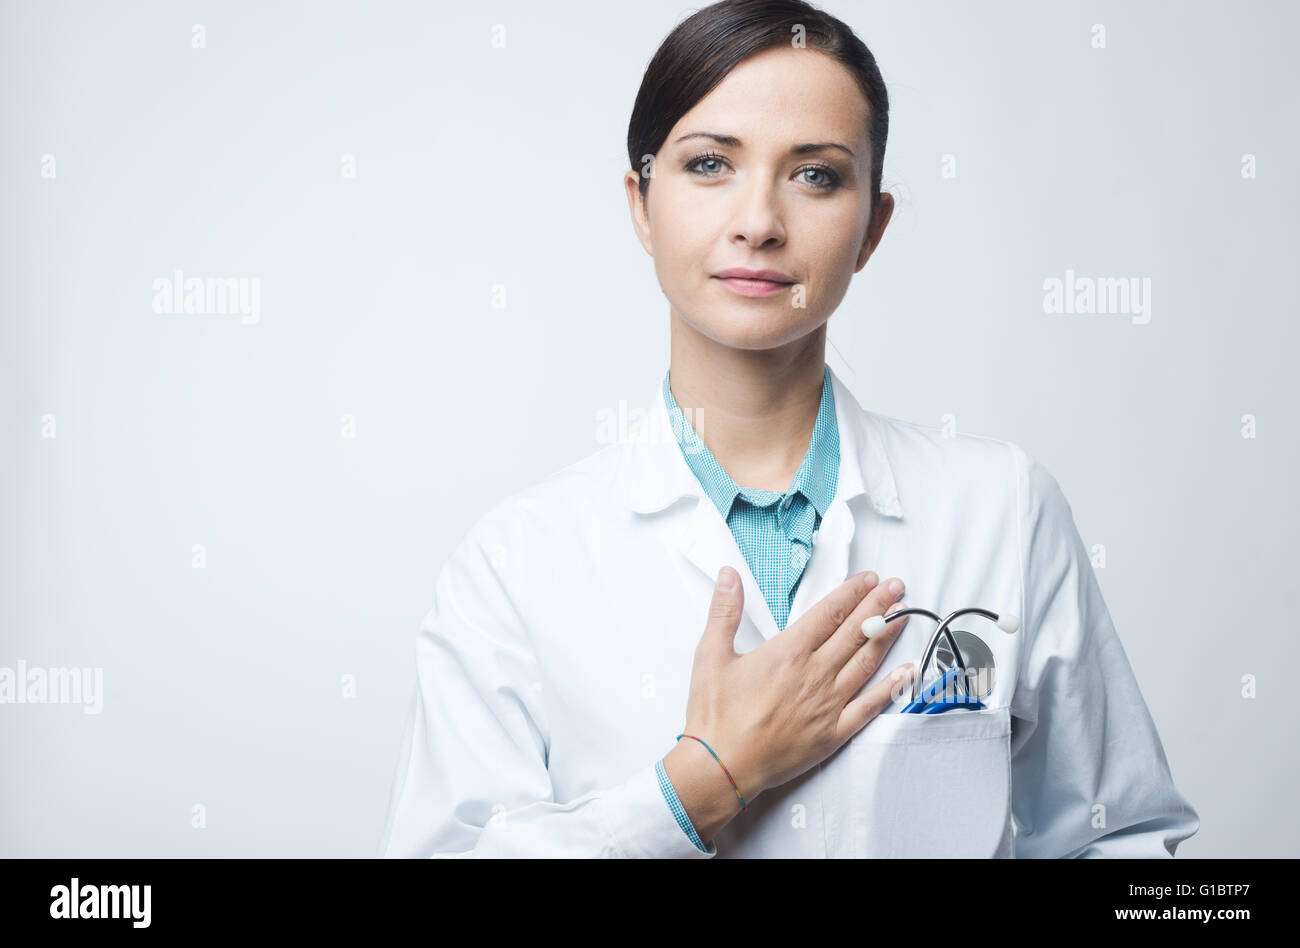 Attractive female cardiologist with stethoscope and lab coat, touching her chest. Stock Photo